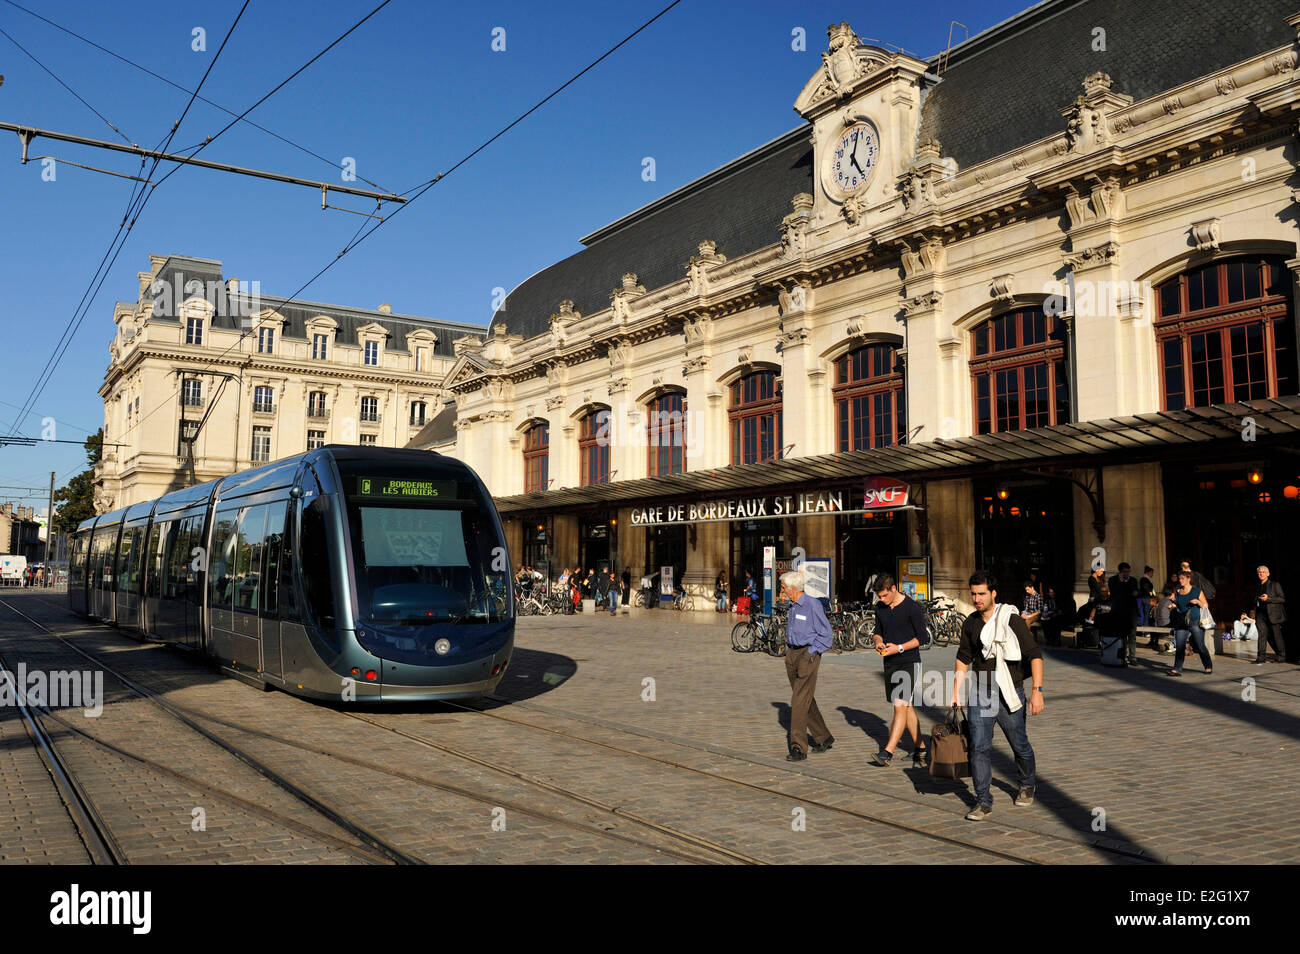 France Gironde Bordeaux Saint Jean train station tram passing in front of  the station Stock Photo - Alamy